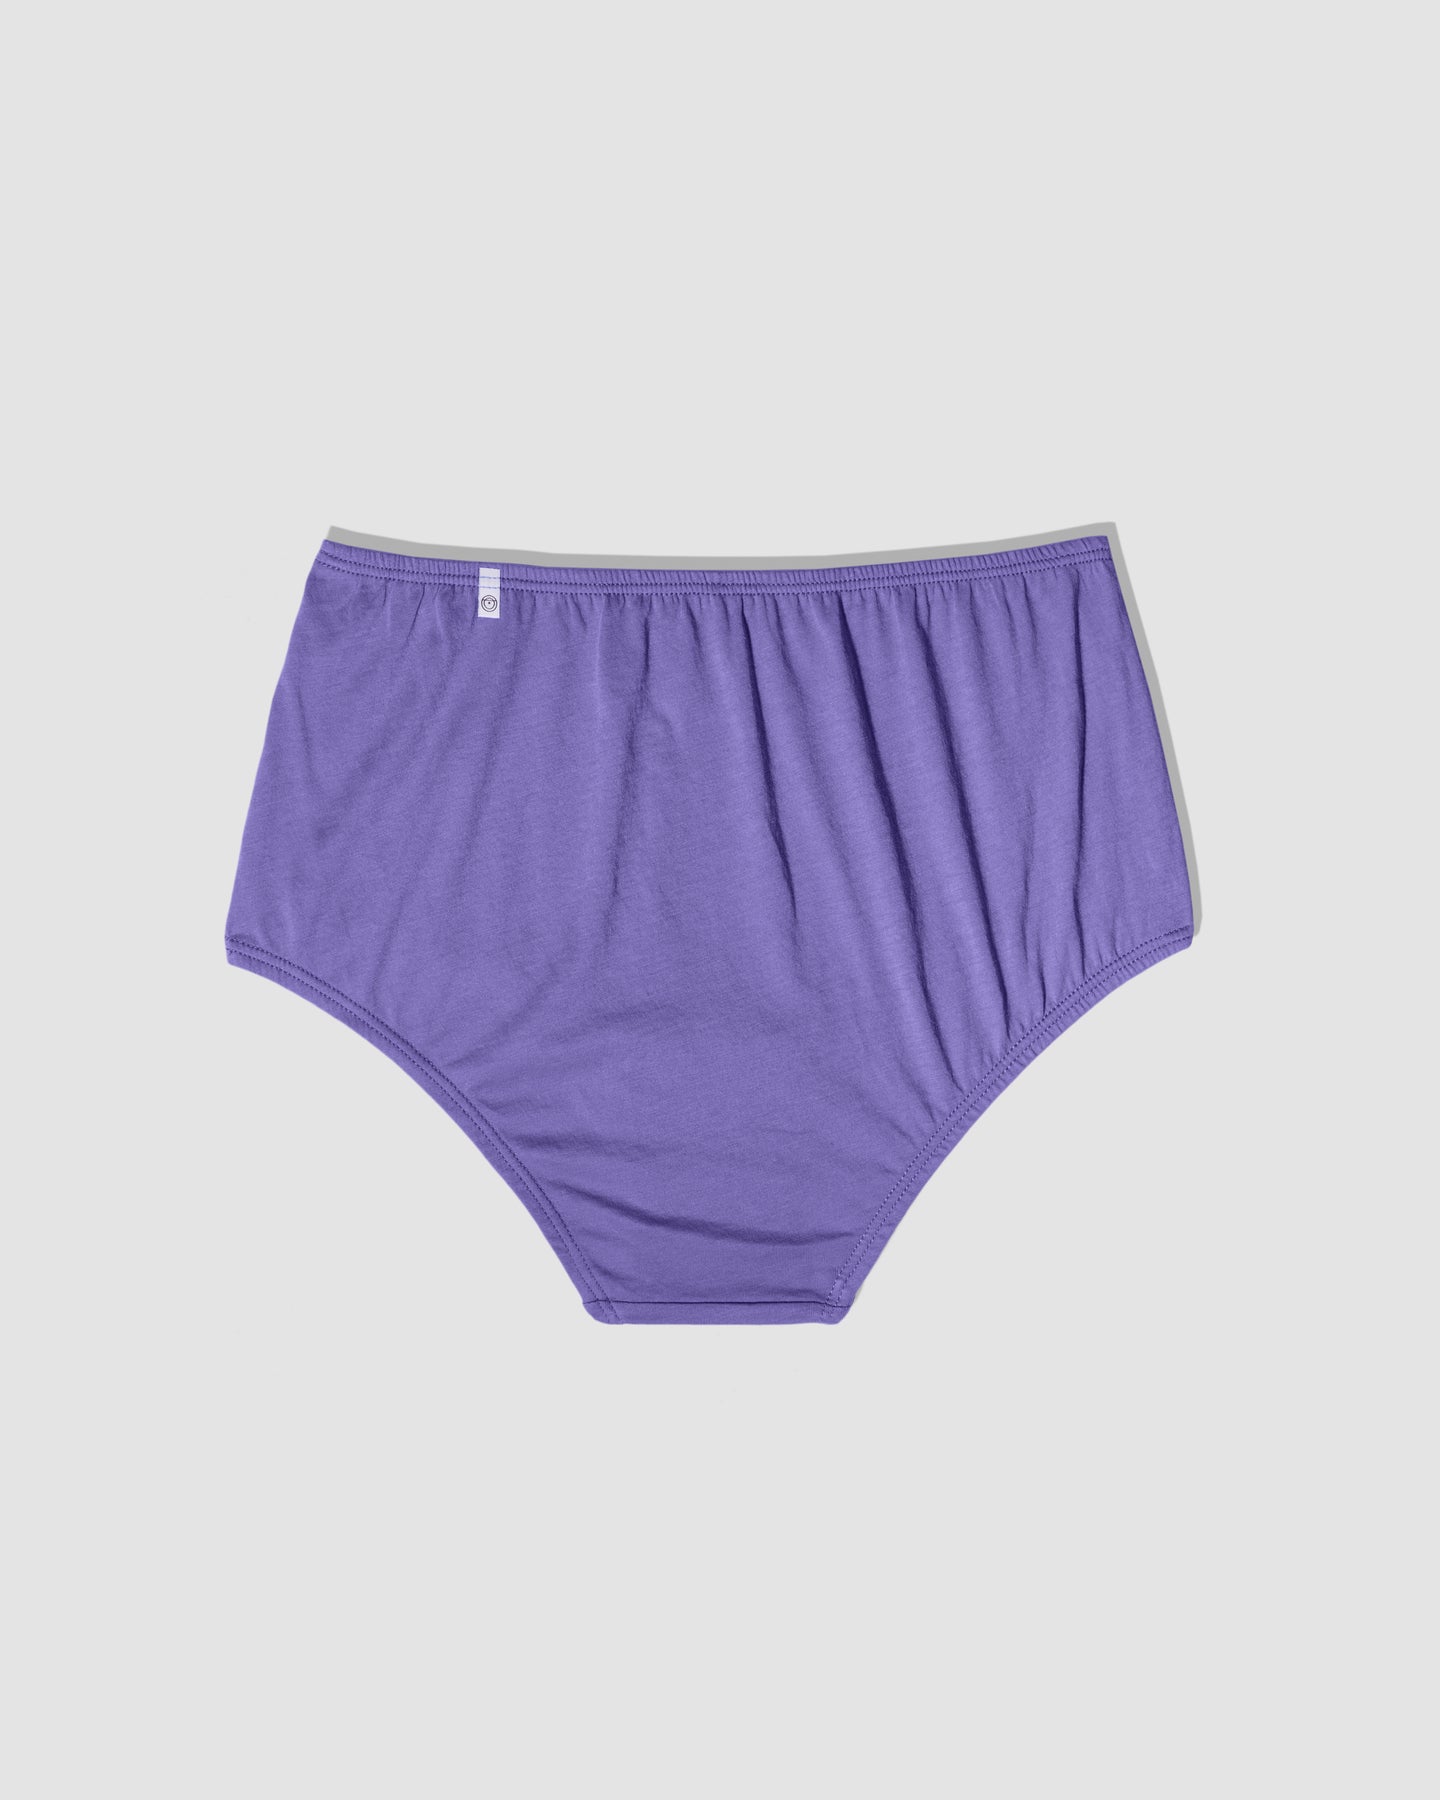 Organic cotton knickers, hipster briefs, Aram - Easter egg purple